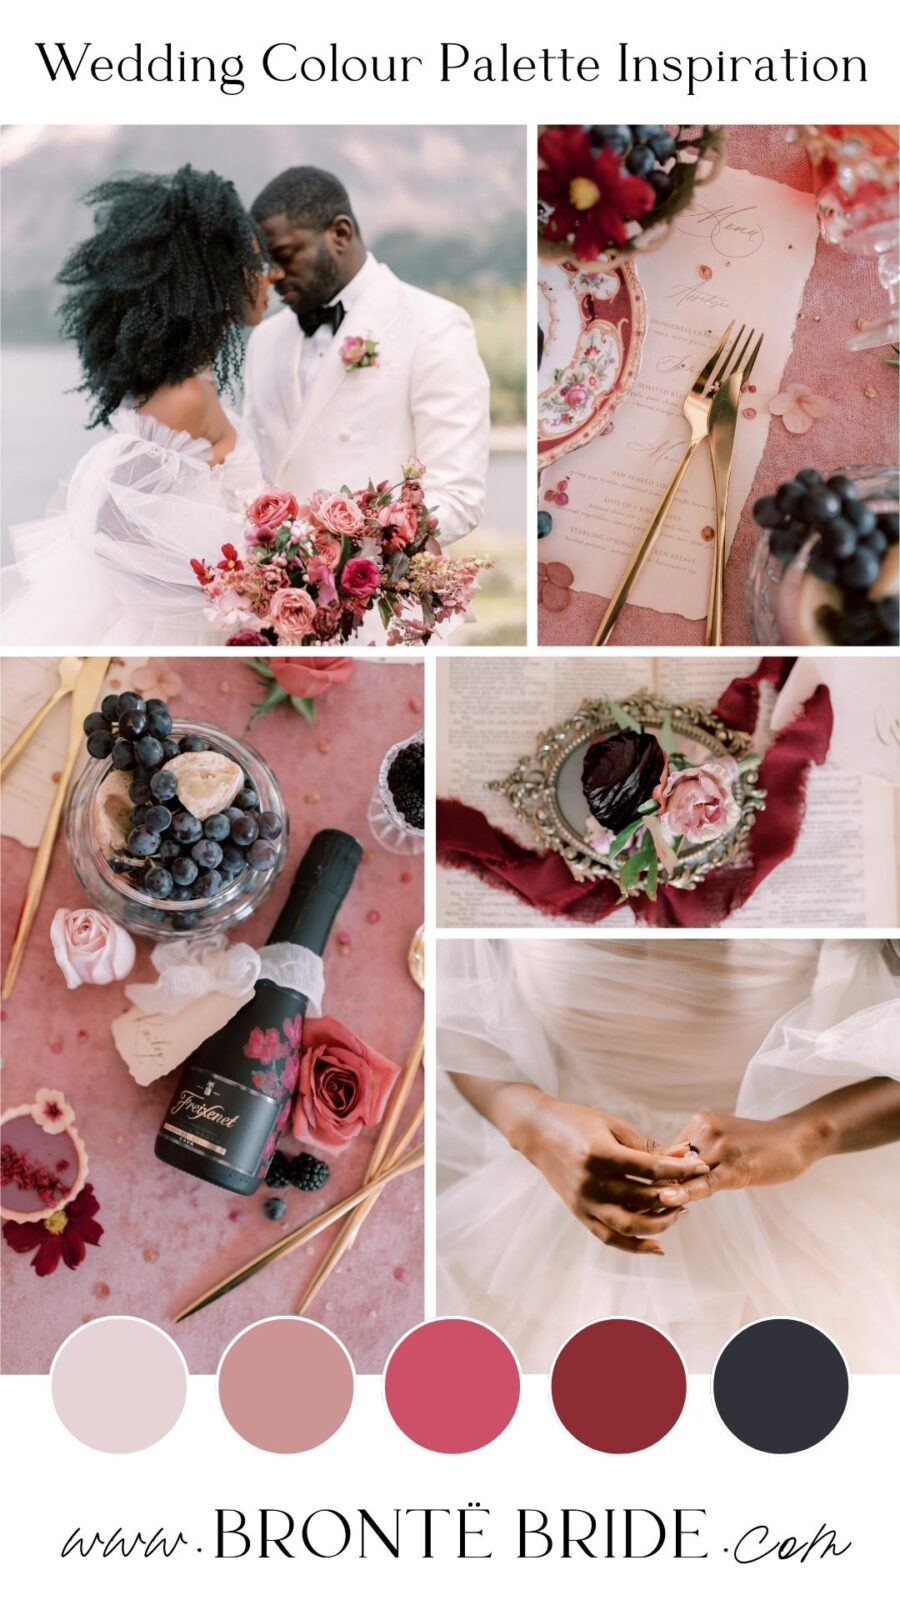 Modern Colour Palette Inspiration - Wedding Mood Board | Burgundy, berry, and wine wedding colour palette